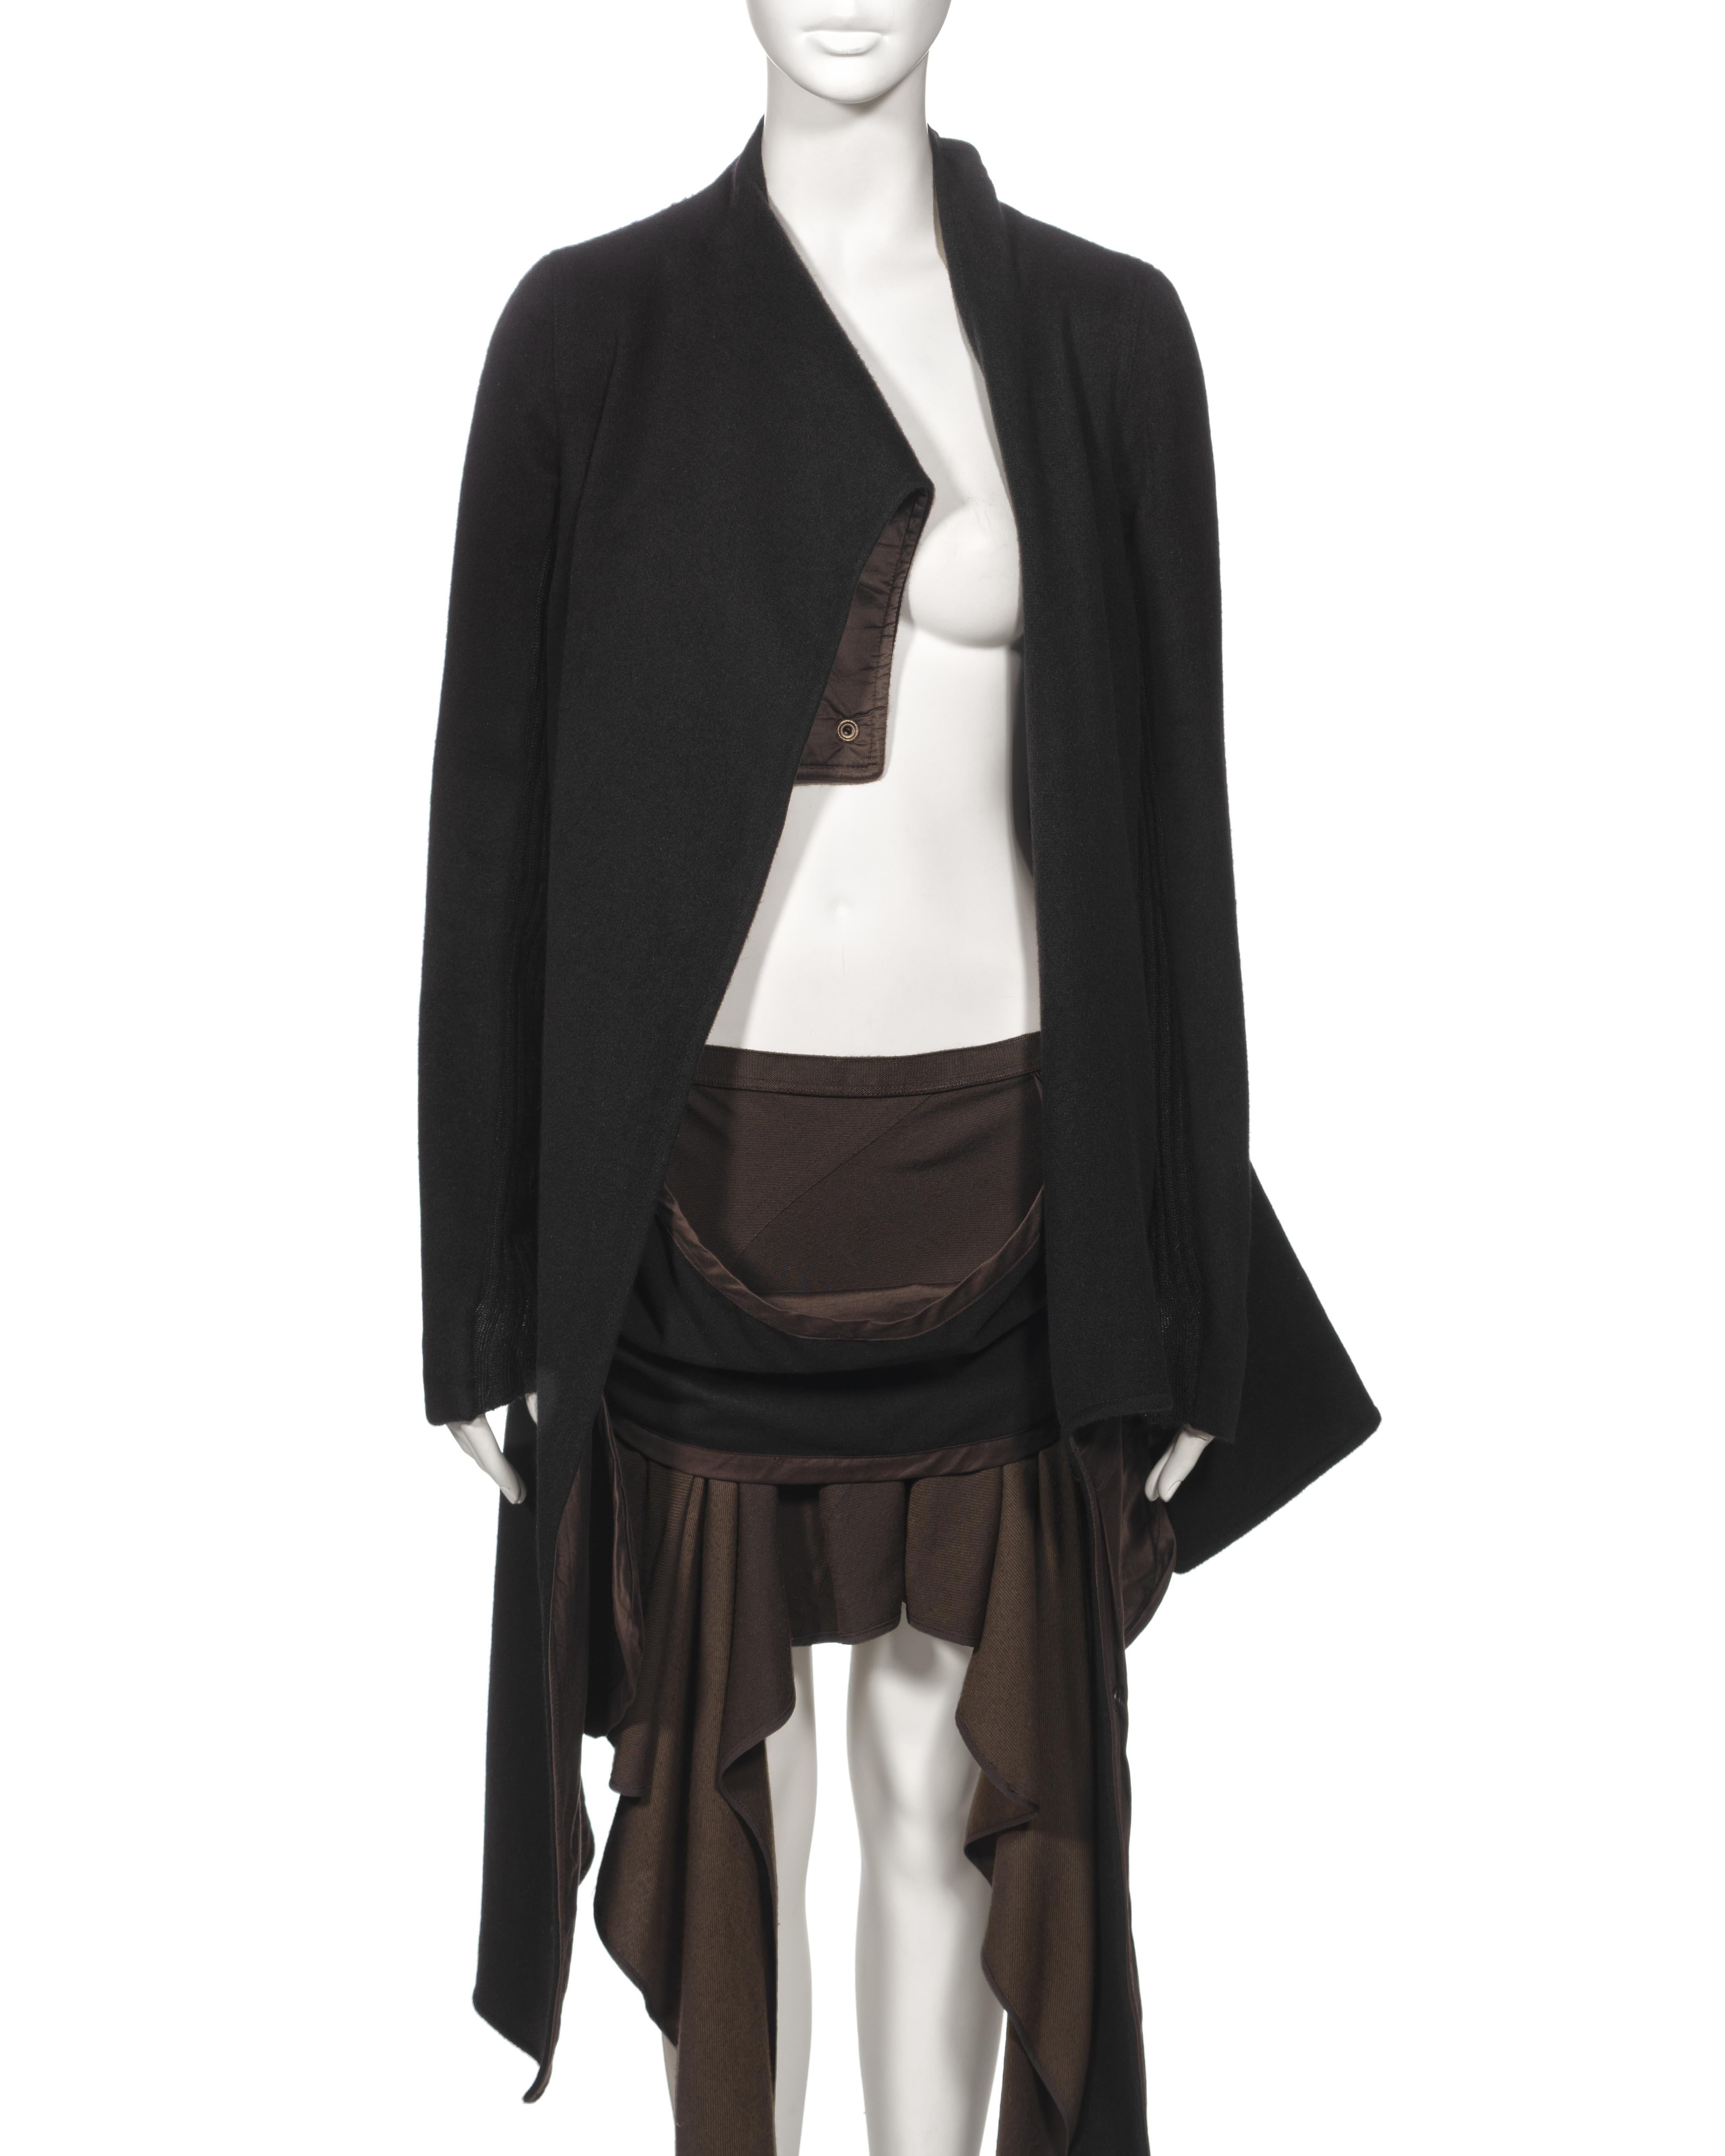 Rick Owens Angora Jacket and Cashmere Skirt 'Queen' Ensemble, fw 2004 In Excellent Condition For Sale In London, GB